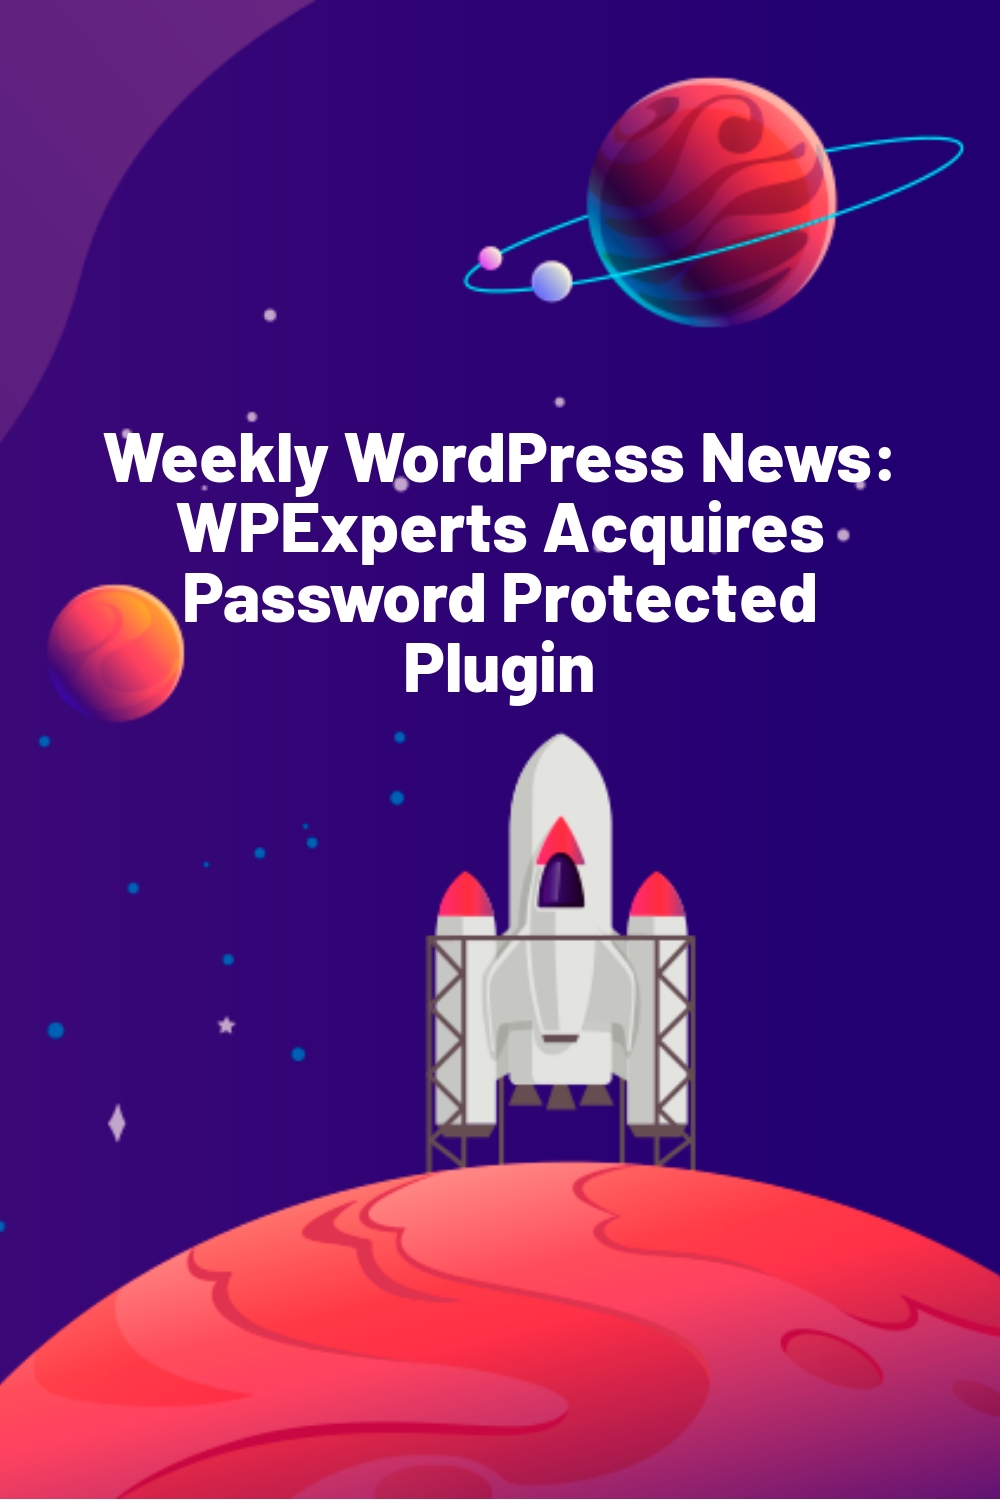 Weekly WordPress News: WPExperts Acquires Password Protected Plugin